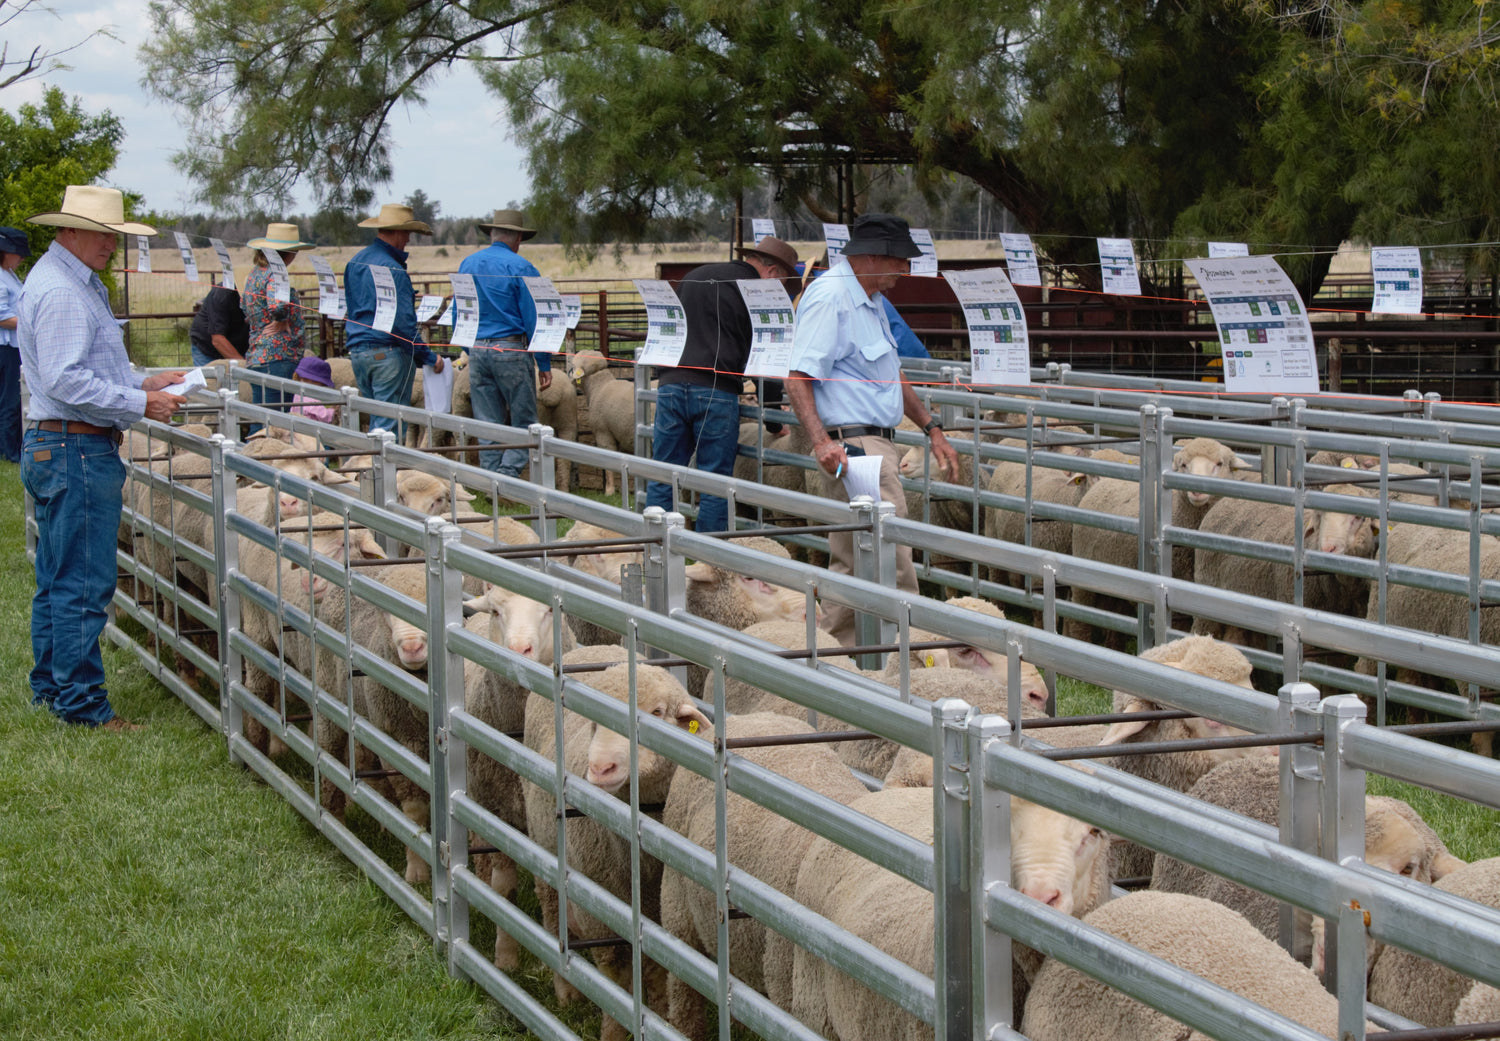 Rams at auction